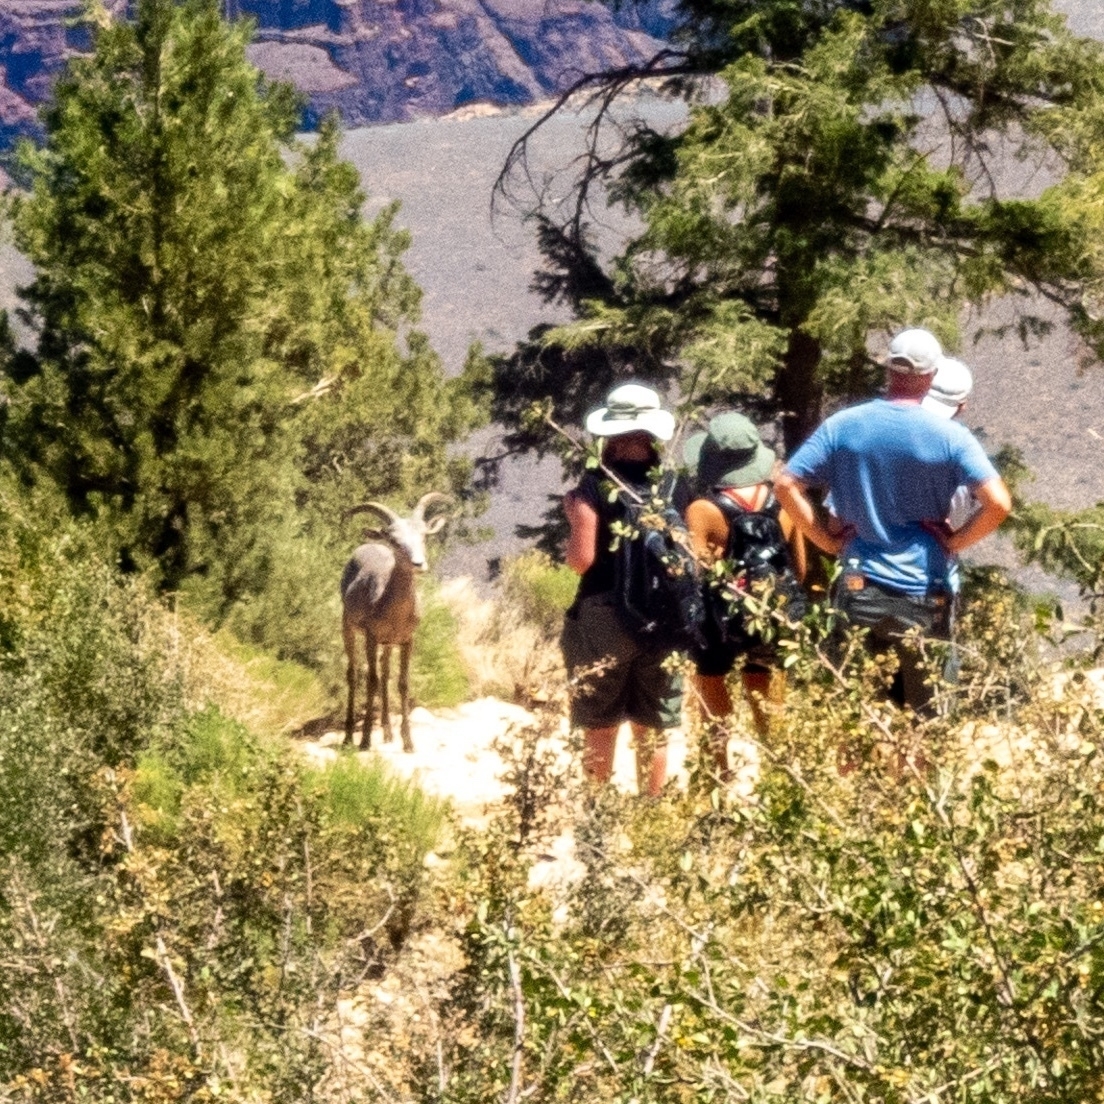 a young big horn sheep on the Trail with some hikers